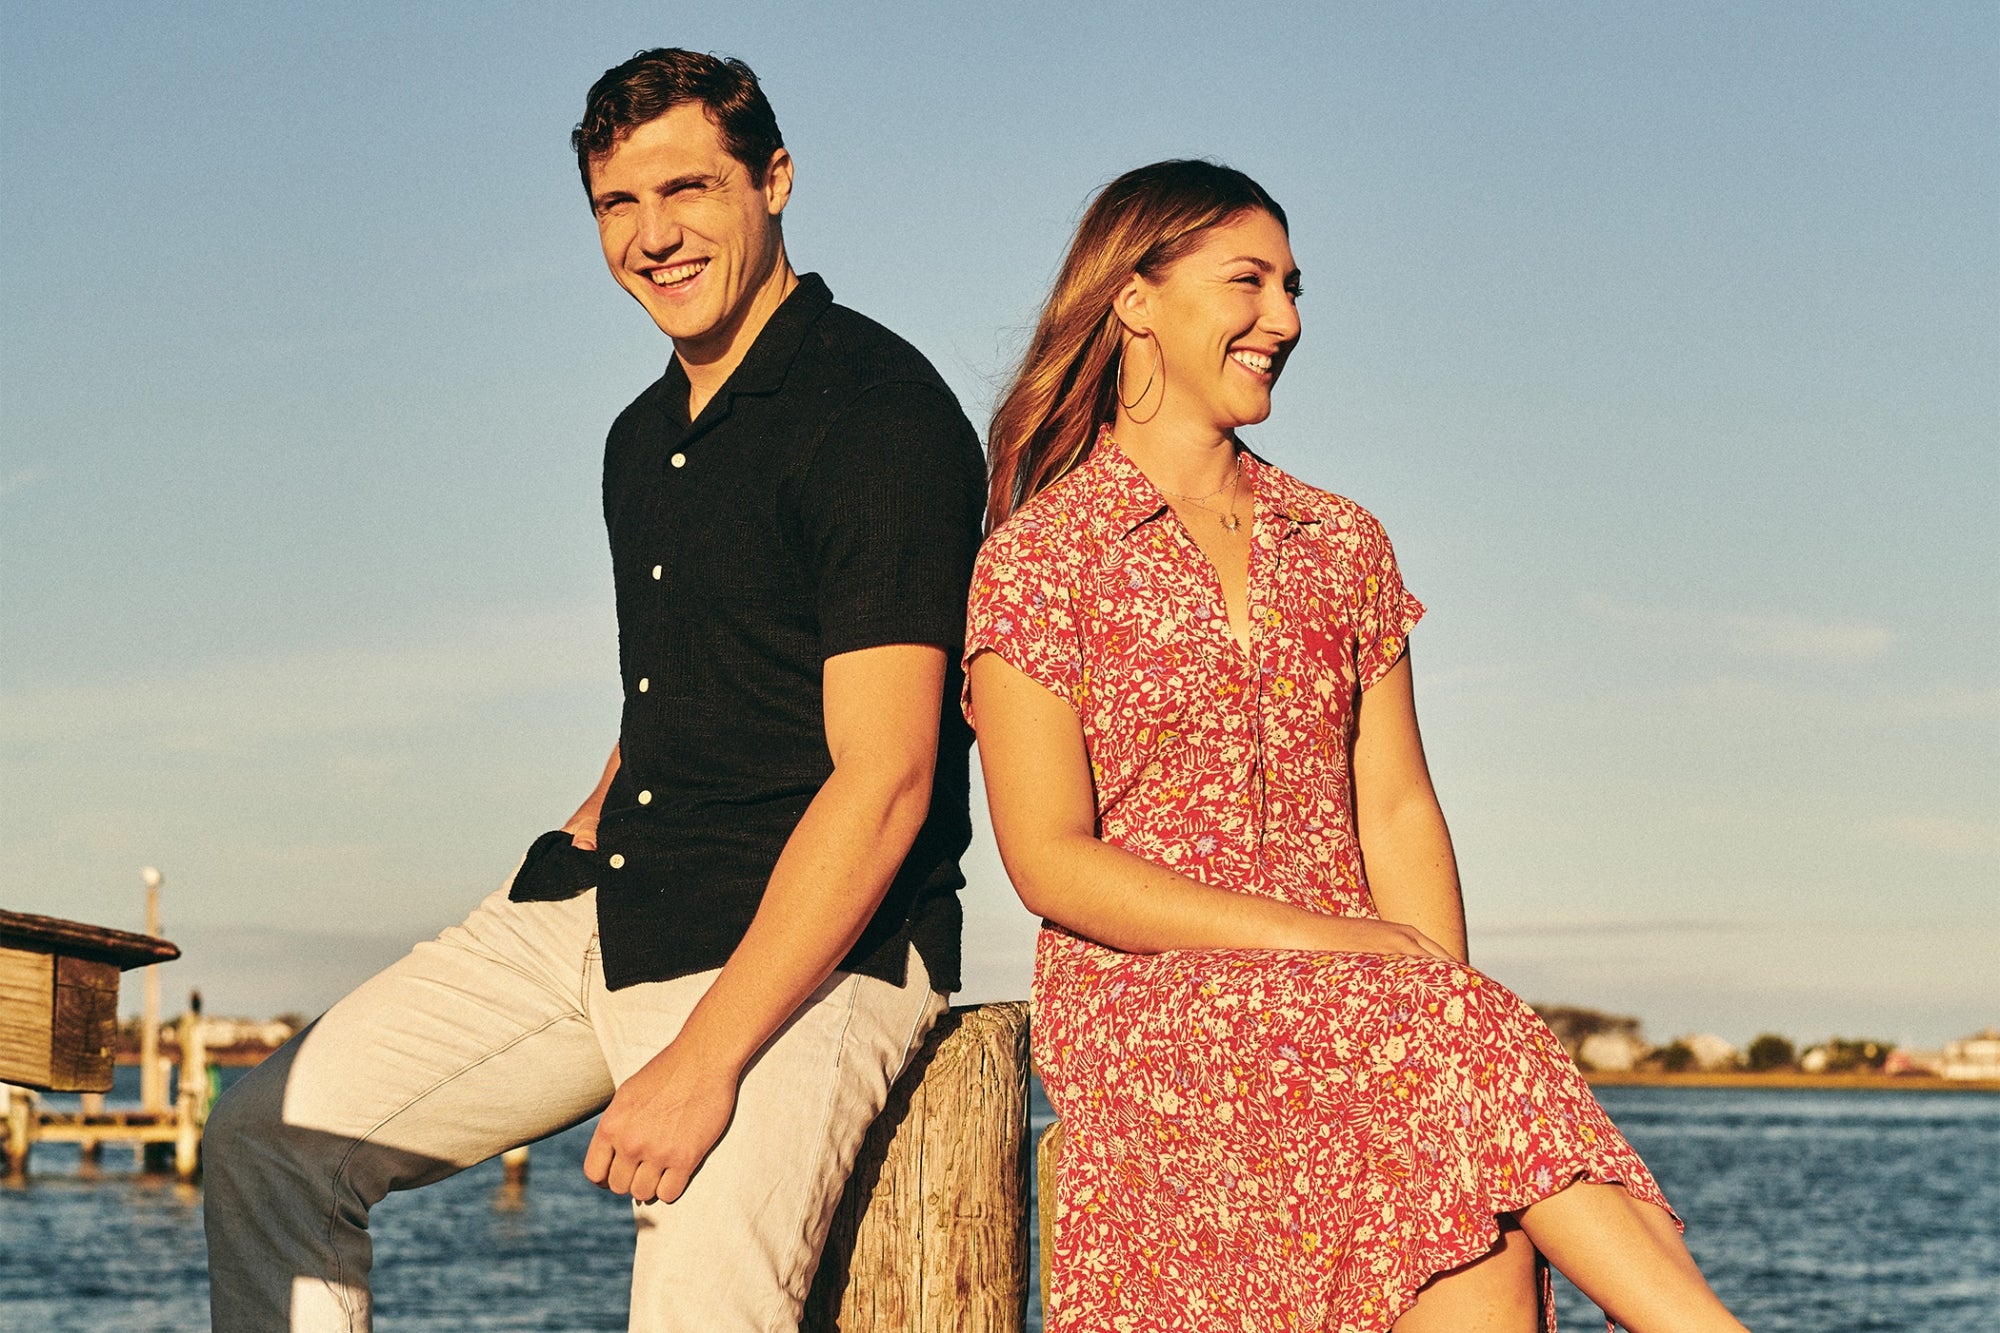 How This Sister and Brother Co-Founded a $45.1 Million Revenue-Generating Sustainable Business